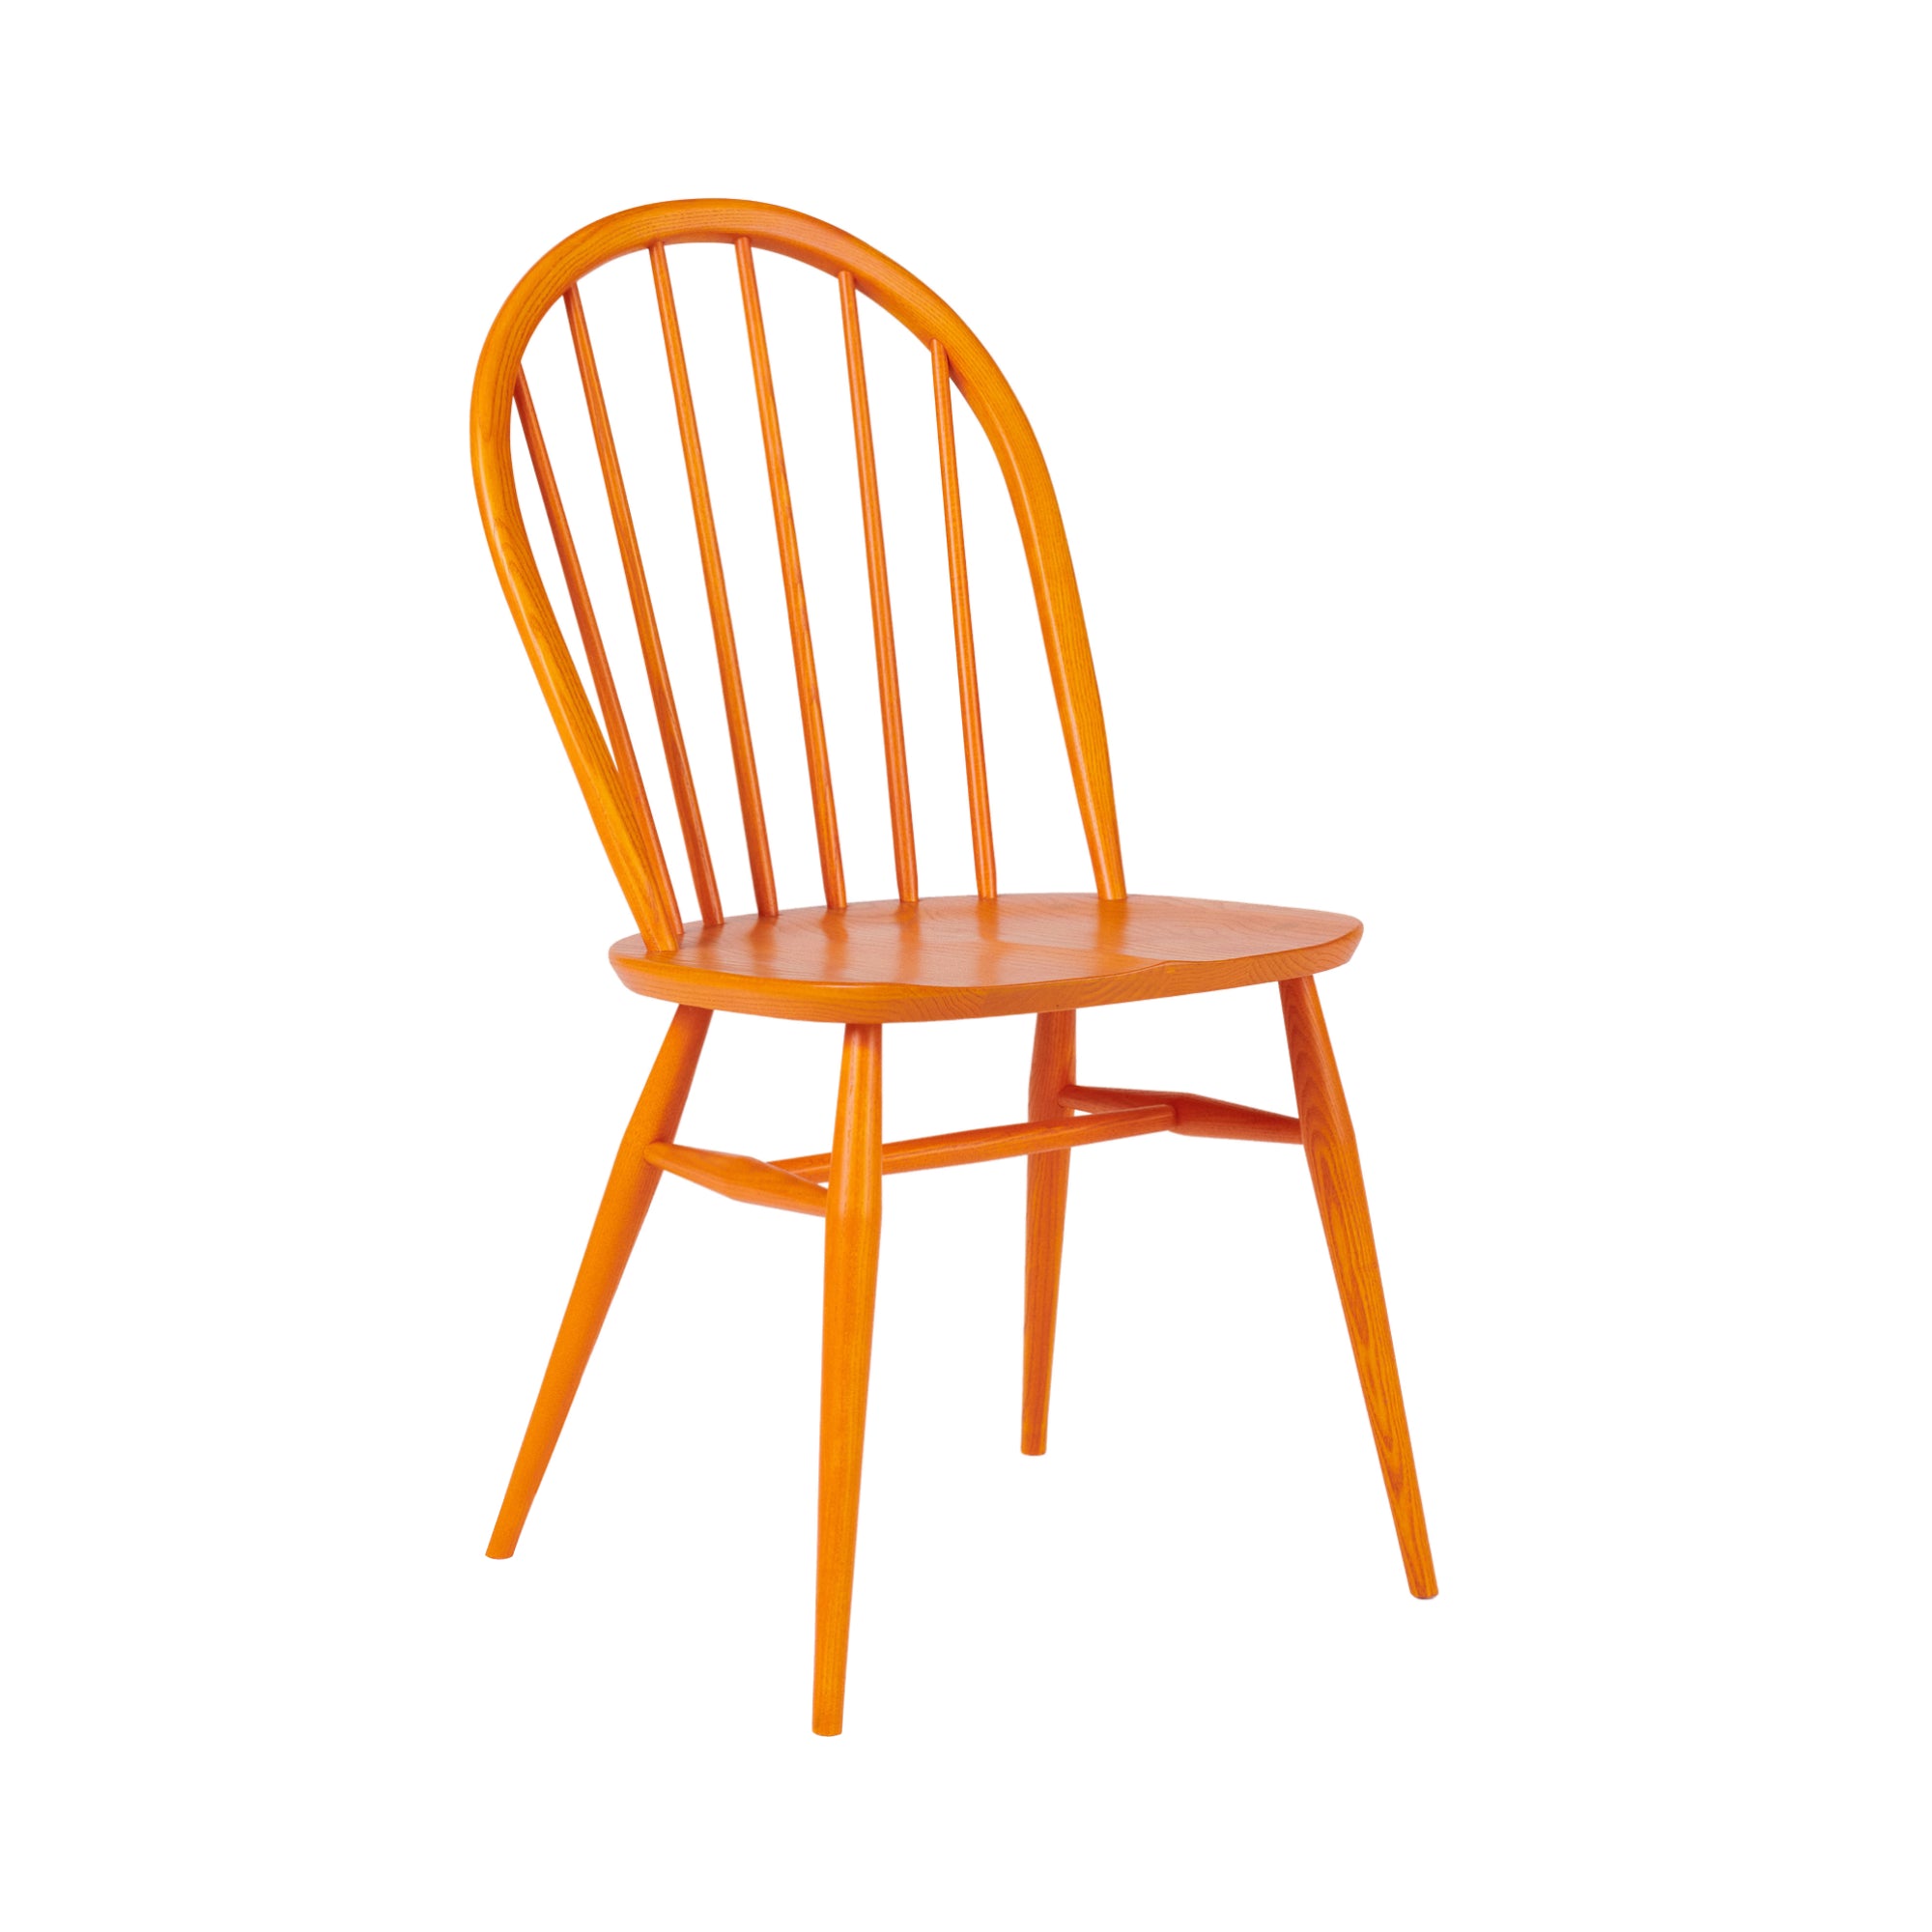 Originals Utility Dining Chair: Stained Ochre